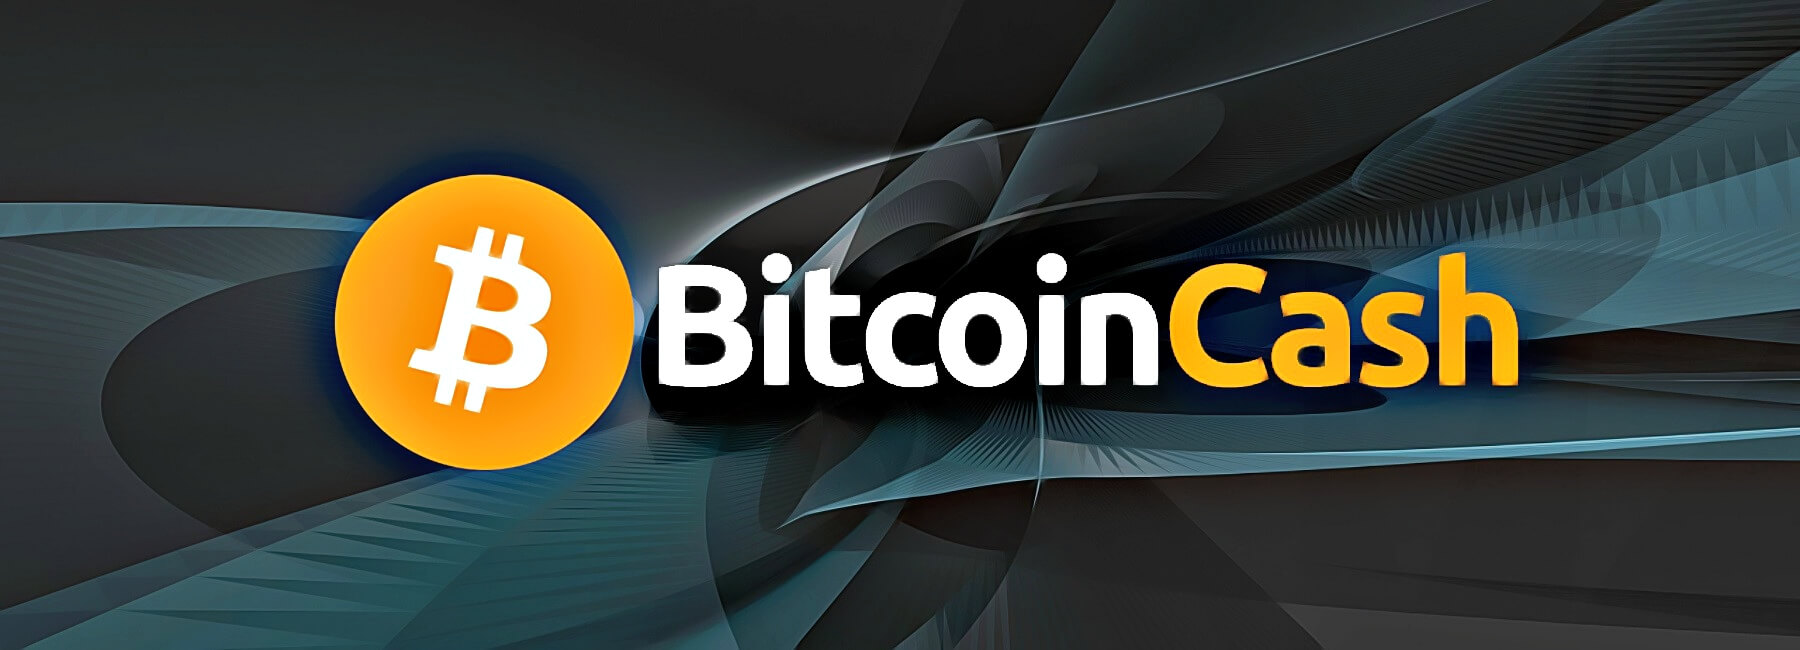 Bitcoin ABC airdrop - Earn crypto & join the best airdrops, giveaways and more! - Airdrop Alert